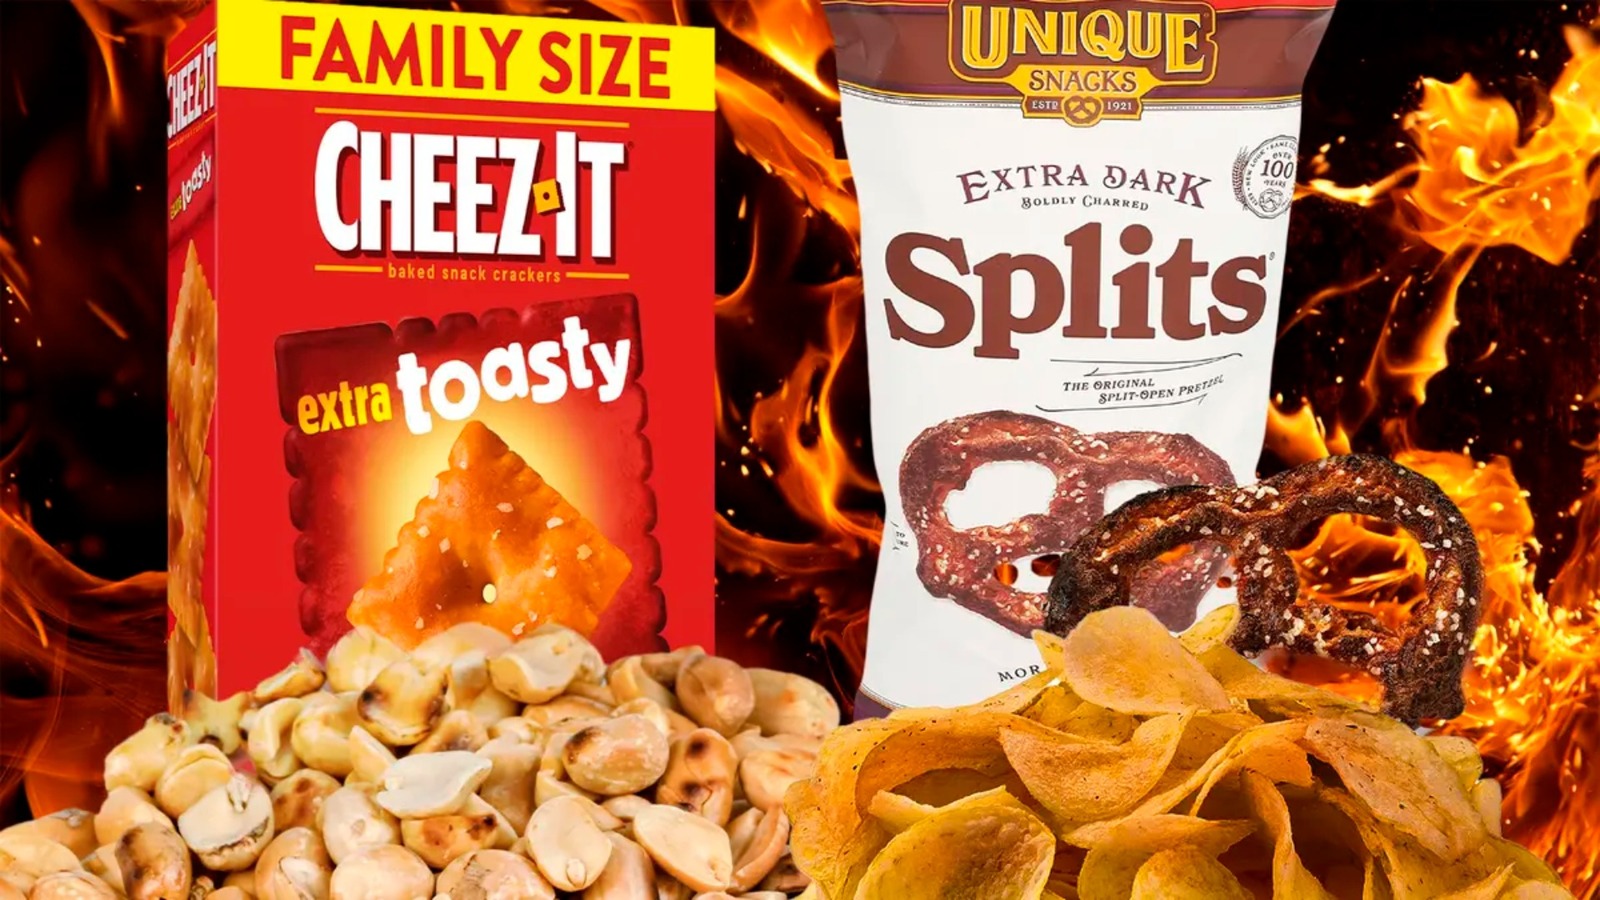 What’s the deal with the burnt snack trend?